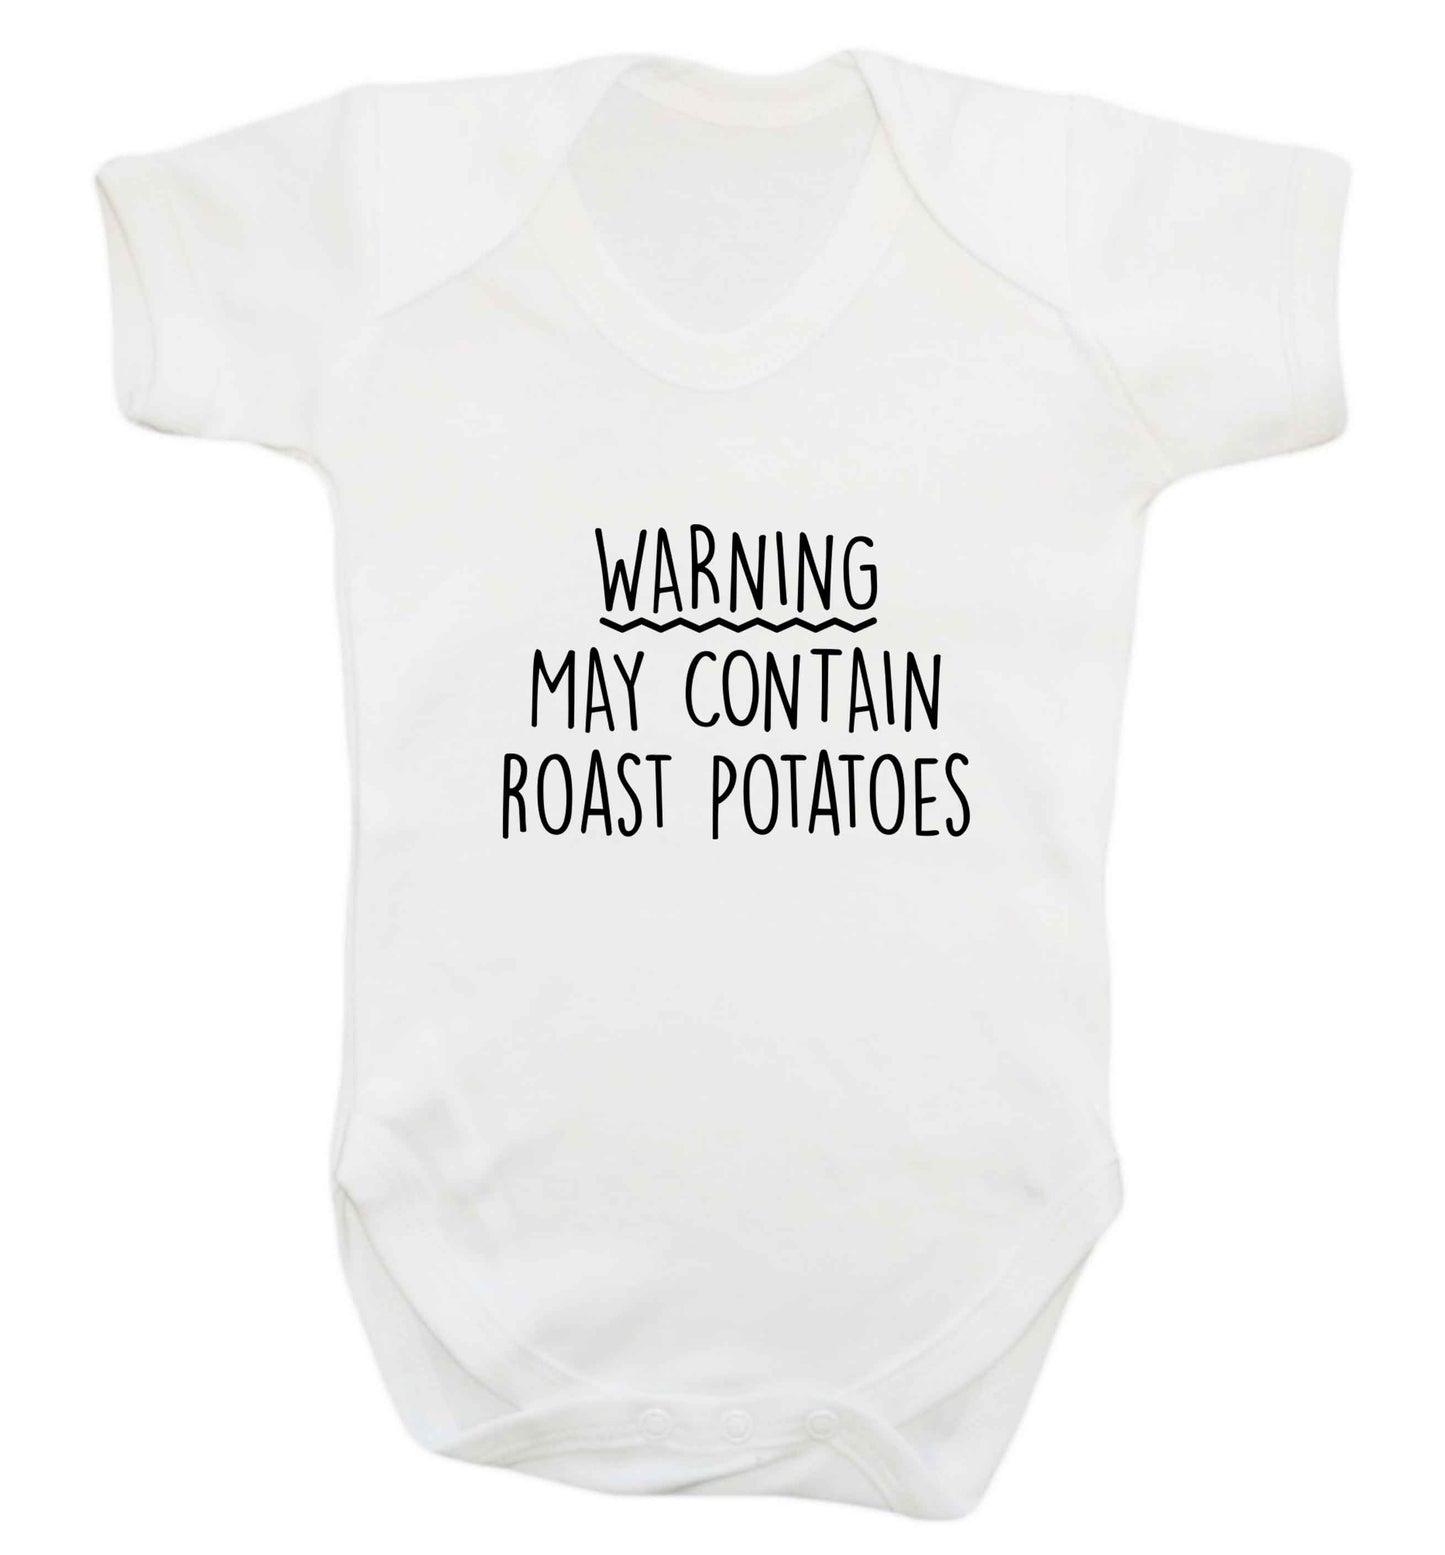 Warning may containg roast potatoes baby vest white 18-24 months